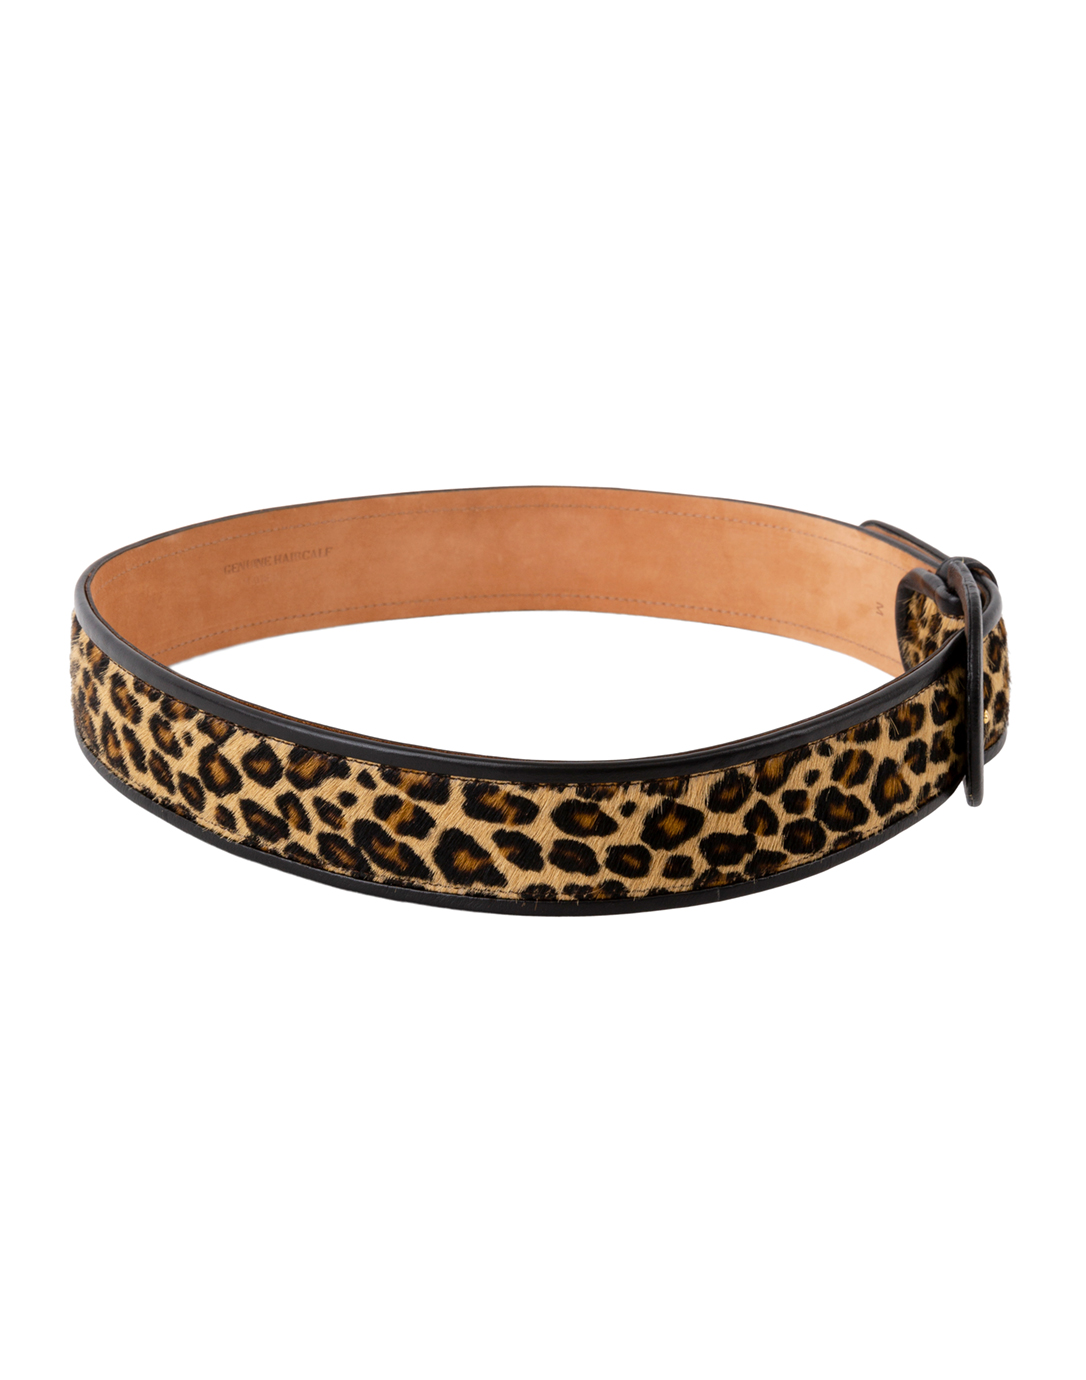 Leopard Calf Hair Belt with Black Leather Piping | W. Kleinberg | Halsbrook